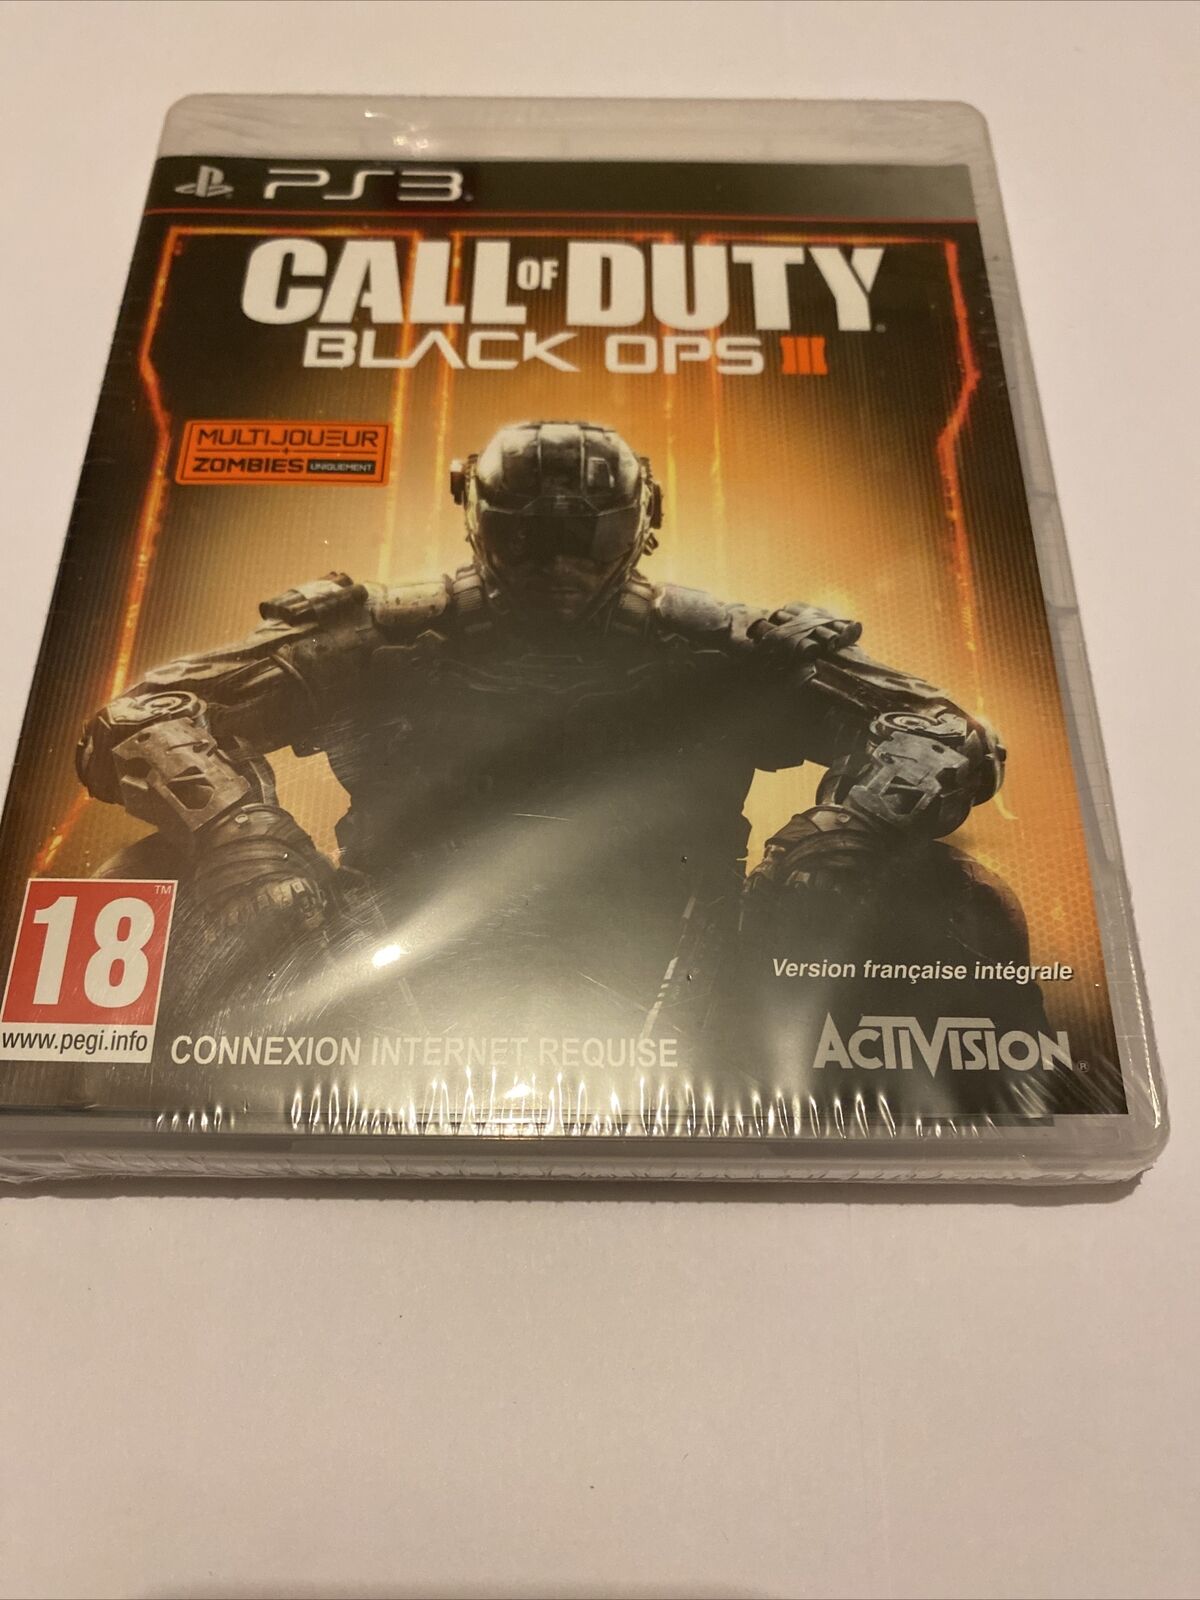 PLAYSTATION PS3 Fr Call of Duty Ops 3 Multiplayer Zombies DVD 5030917162435 | eBay